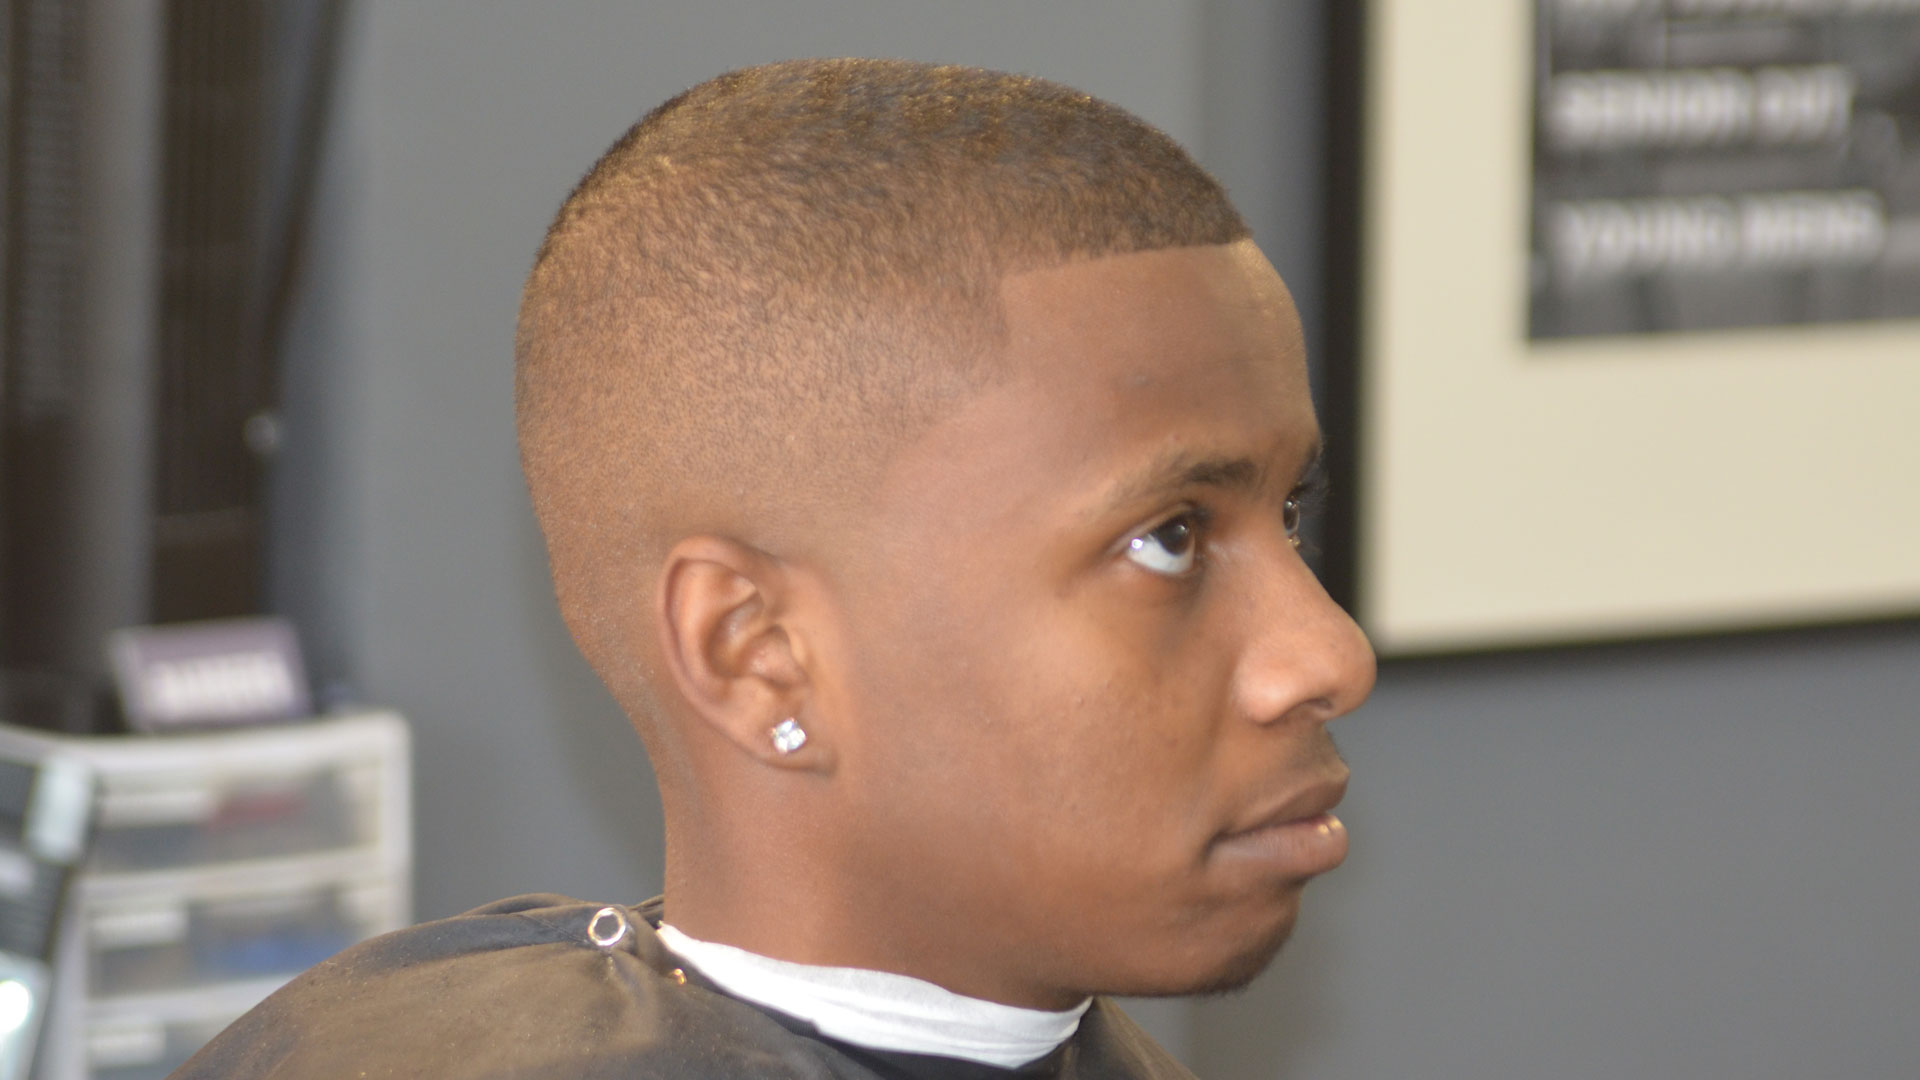 Bald Fade Ethnic / Black / African American Hair | Dave Diggs | Online